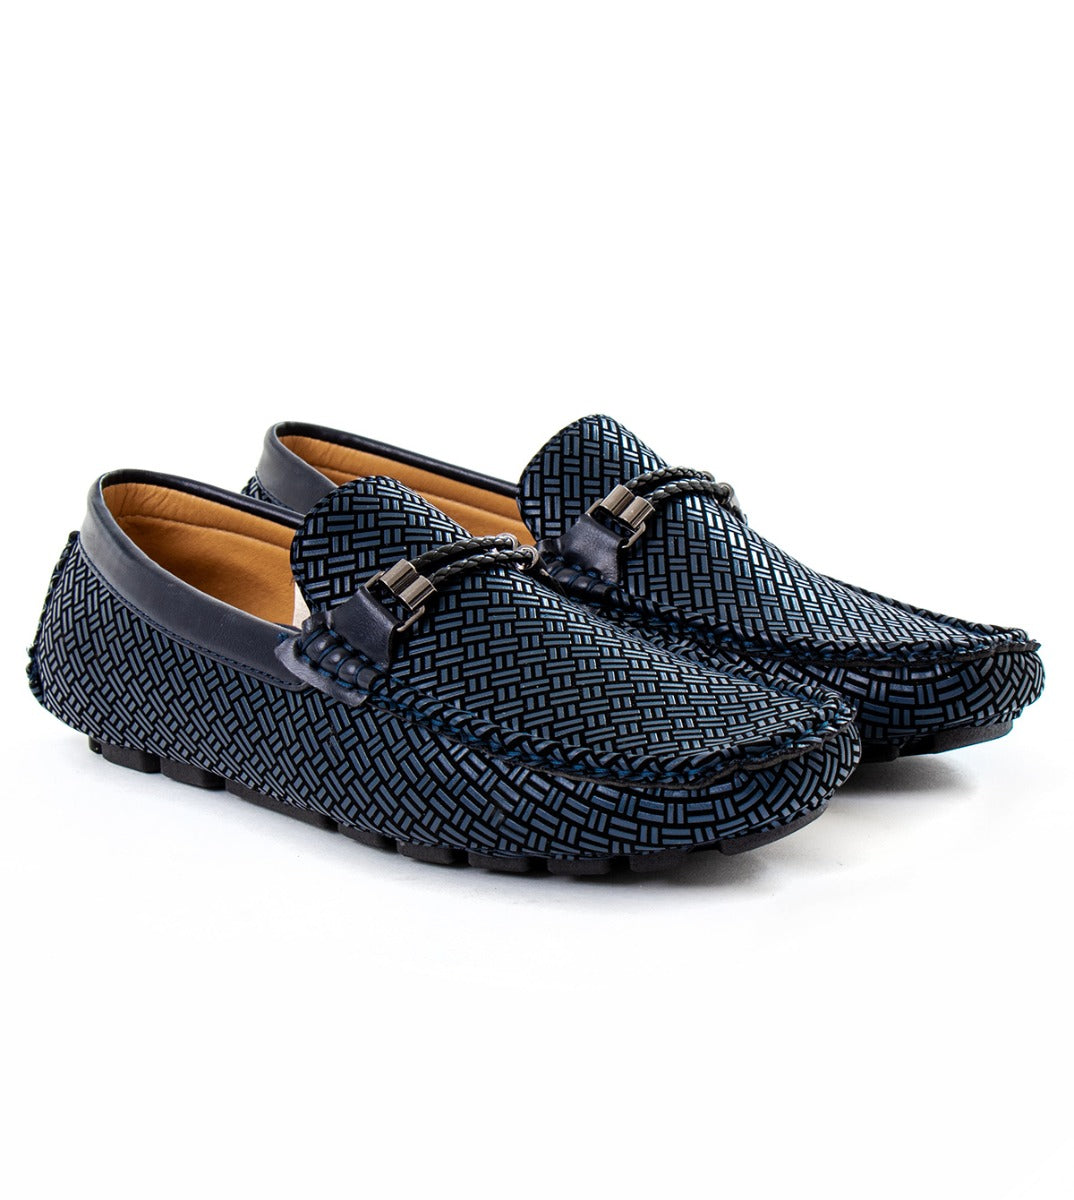 Men's Shoes Shoes With Buckle Moccasins Faux Leather Blue Sporty Elegant GIOSAL-S1117A